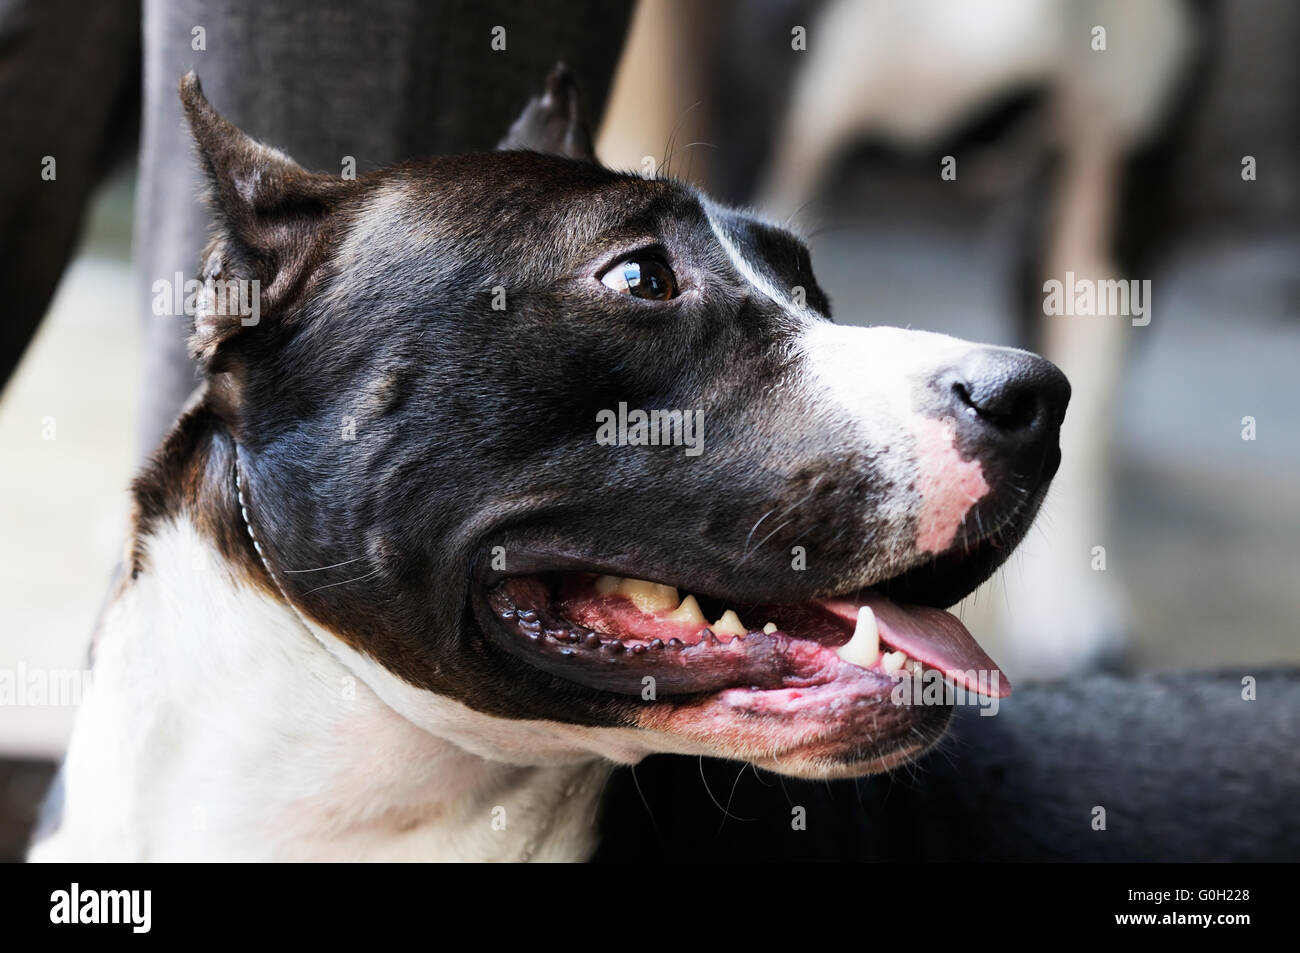 Pedigree Staffordshire Bull Terrier portrait on the blurry background Stock Photo